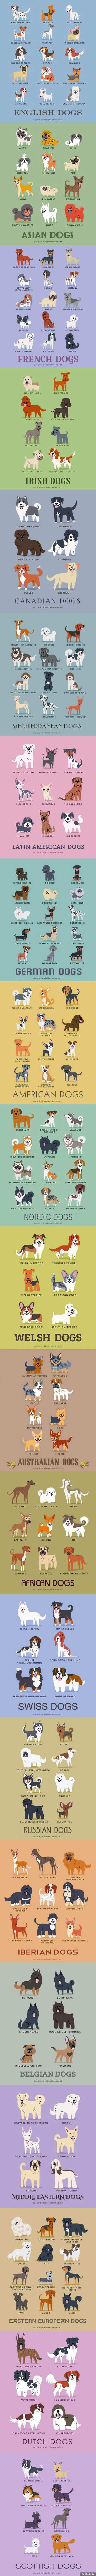 DOG BREED INFOGRAM, INFOGRAPHICS - PRESS TO SEE IN FULL SIZE!!!